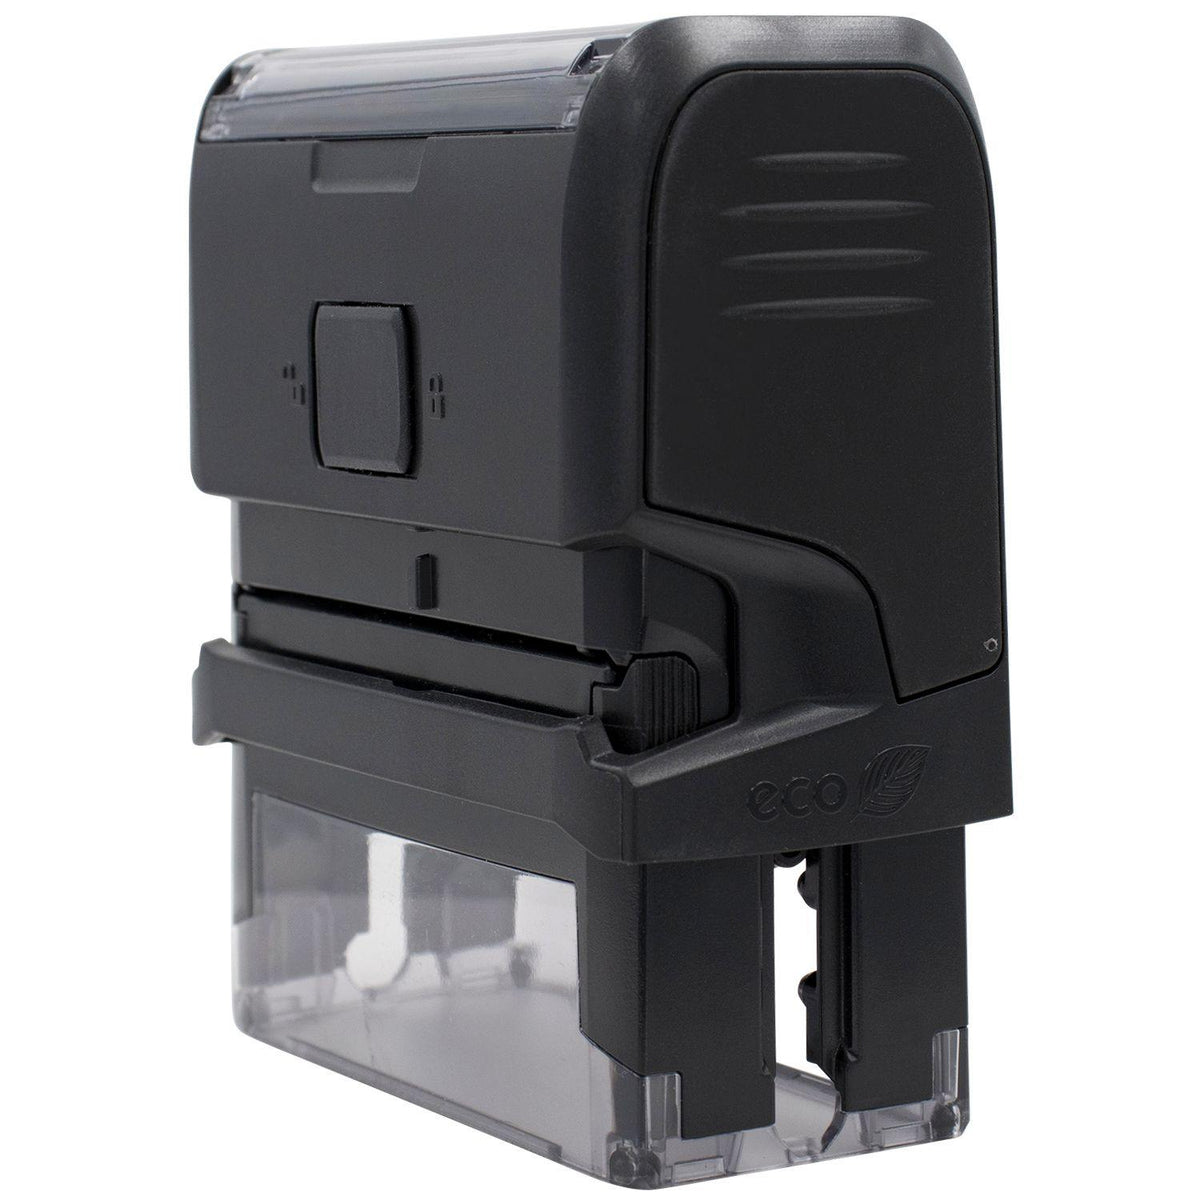 Self Inking Wire Transfer Stamp - Engineer Seal Stamps - Brand_Trodat, Impression Size_Small, Stamp Type_Self-Inking Stamp, Type of Use_Finance